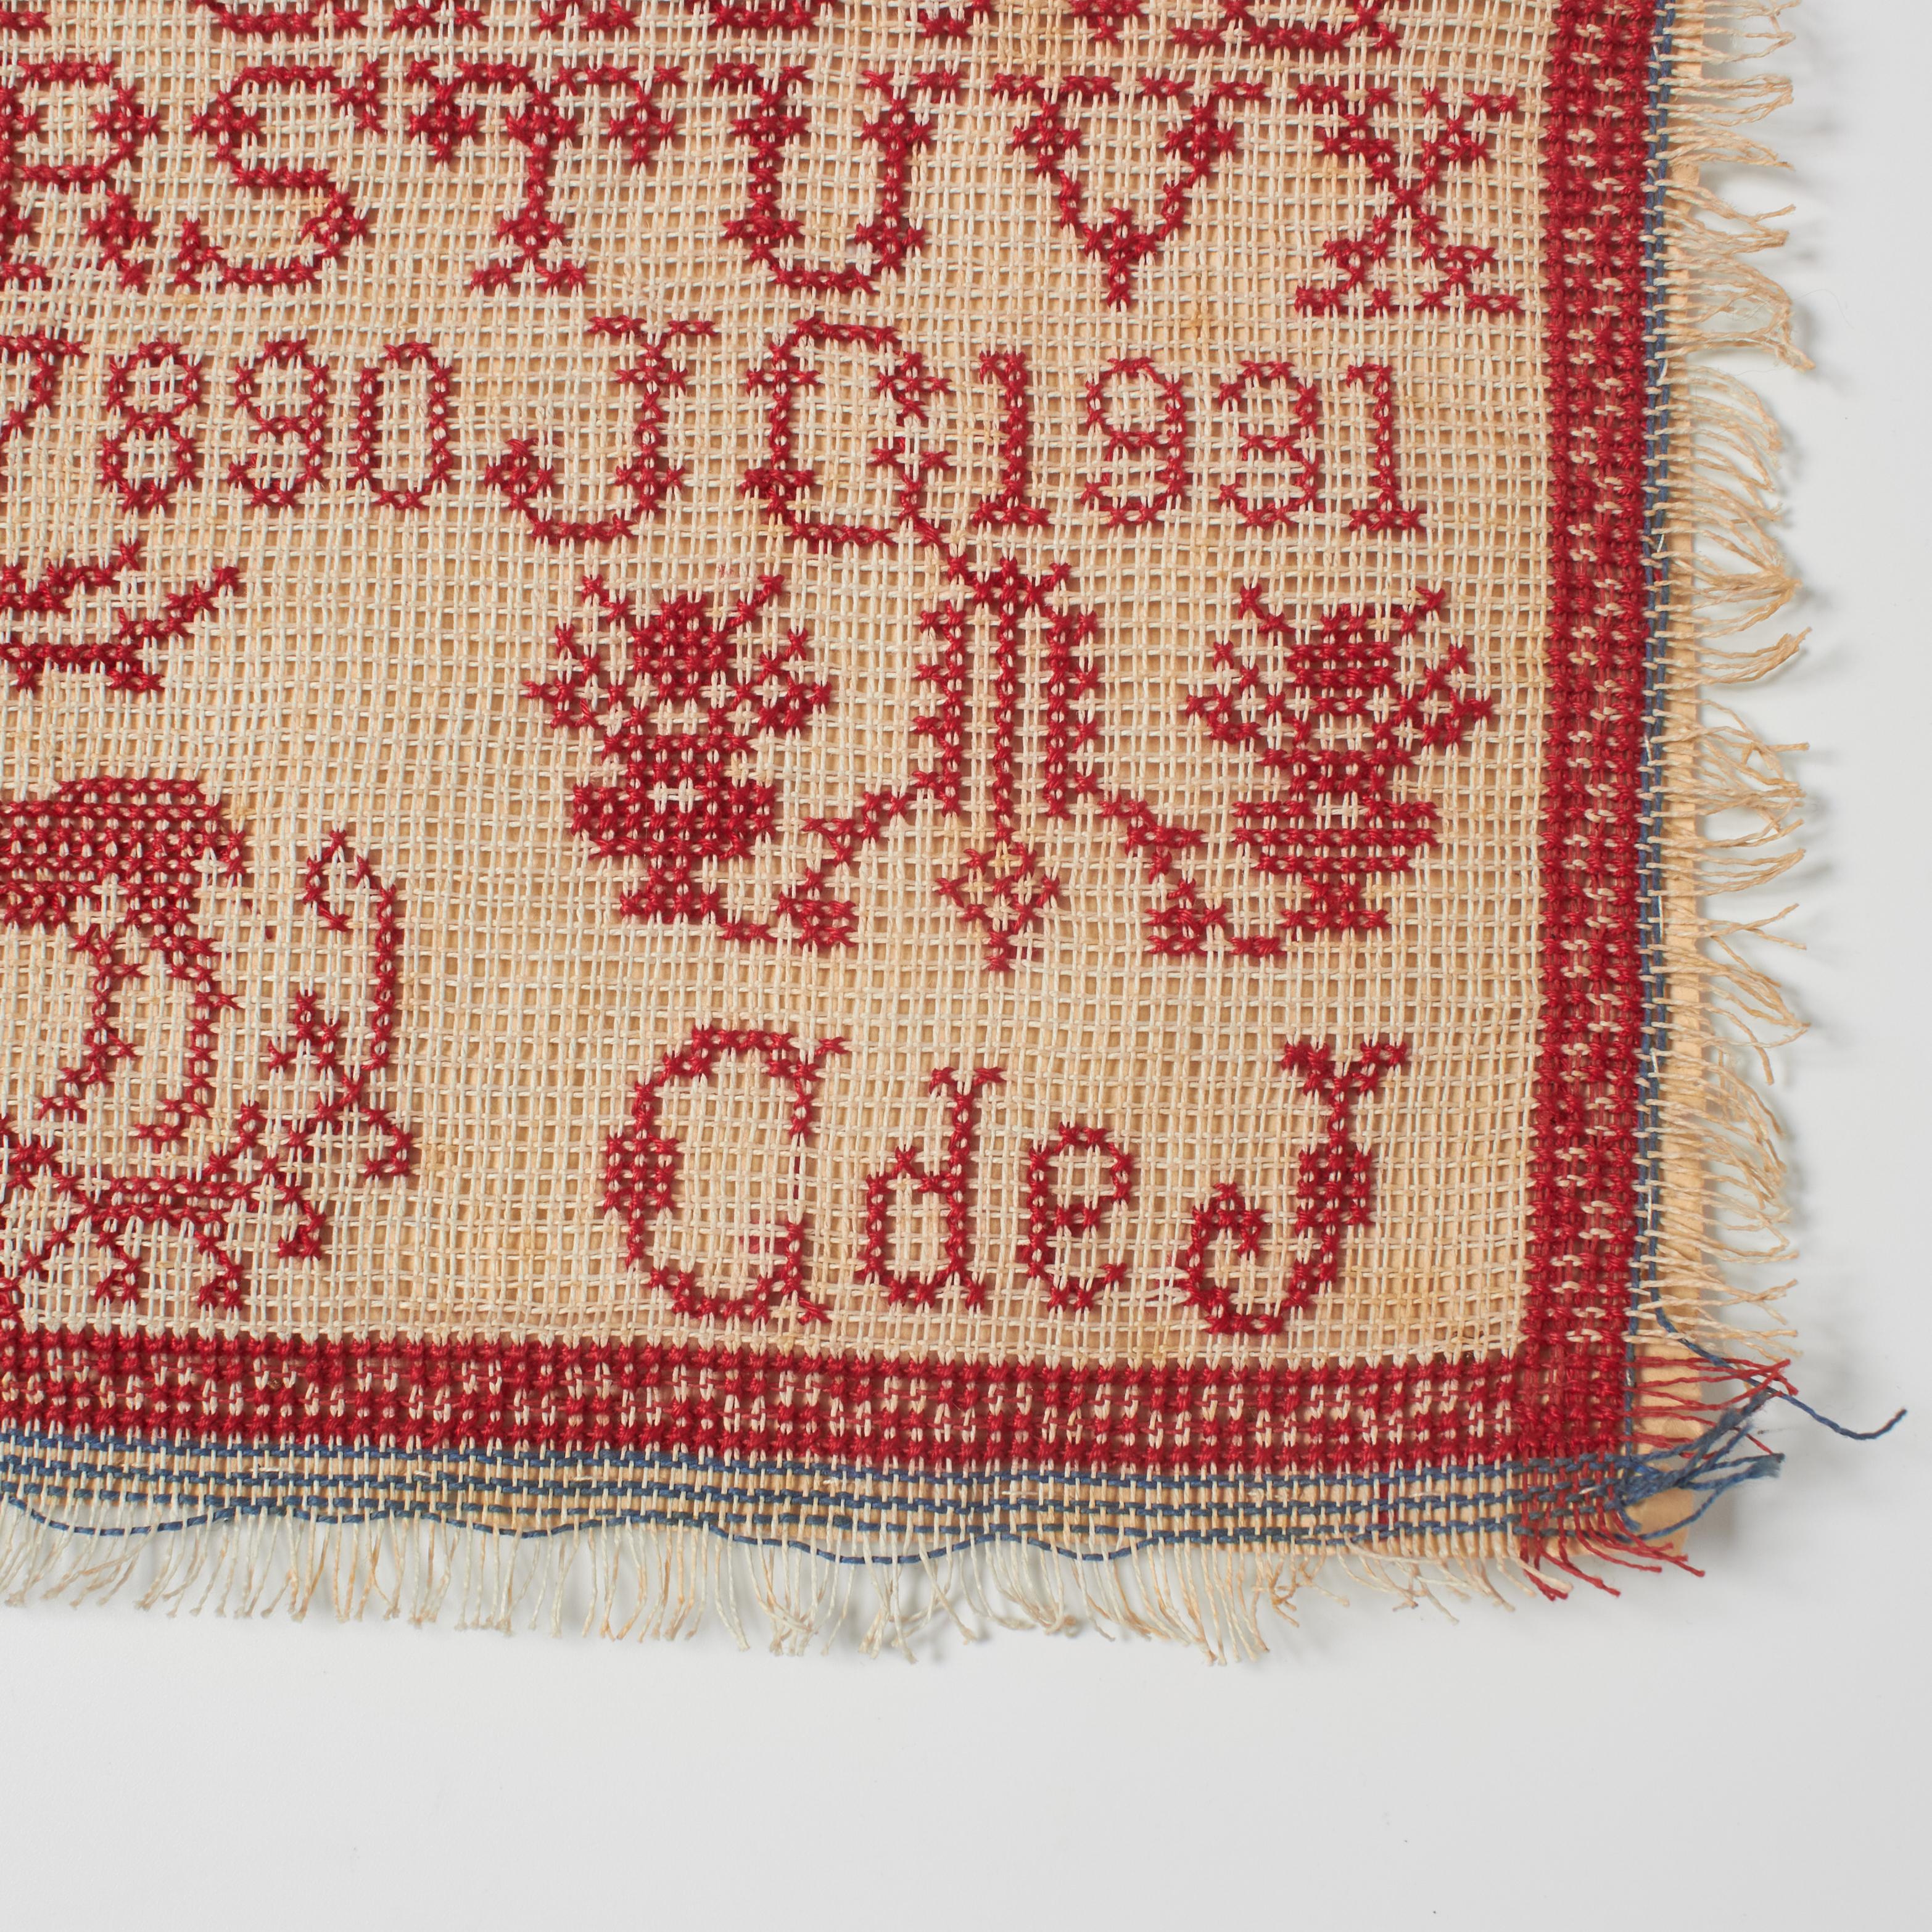 French Vintage 20th Century Red and White Cross-Stitch Sampler with Alphabet & Numbers For Sale